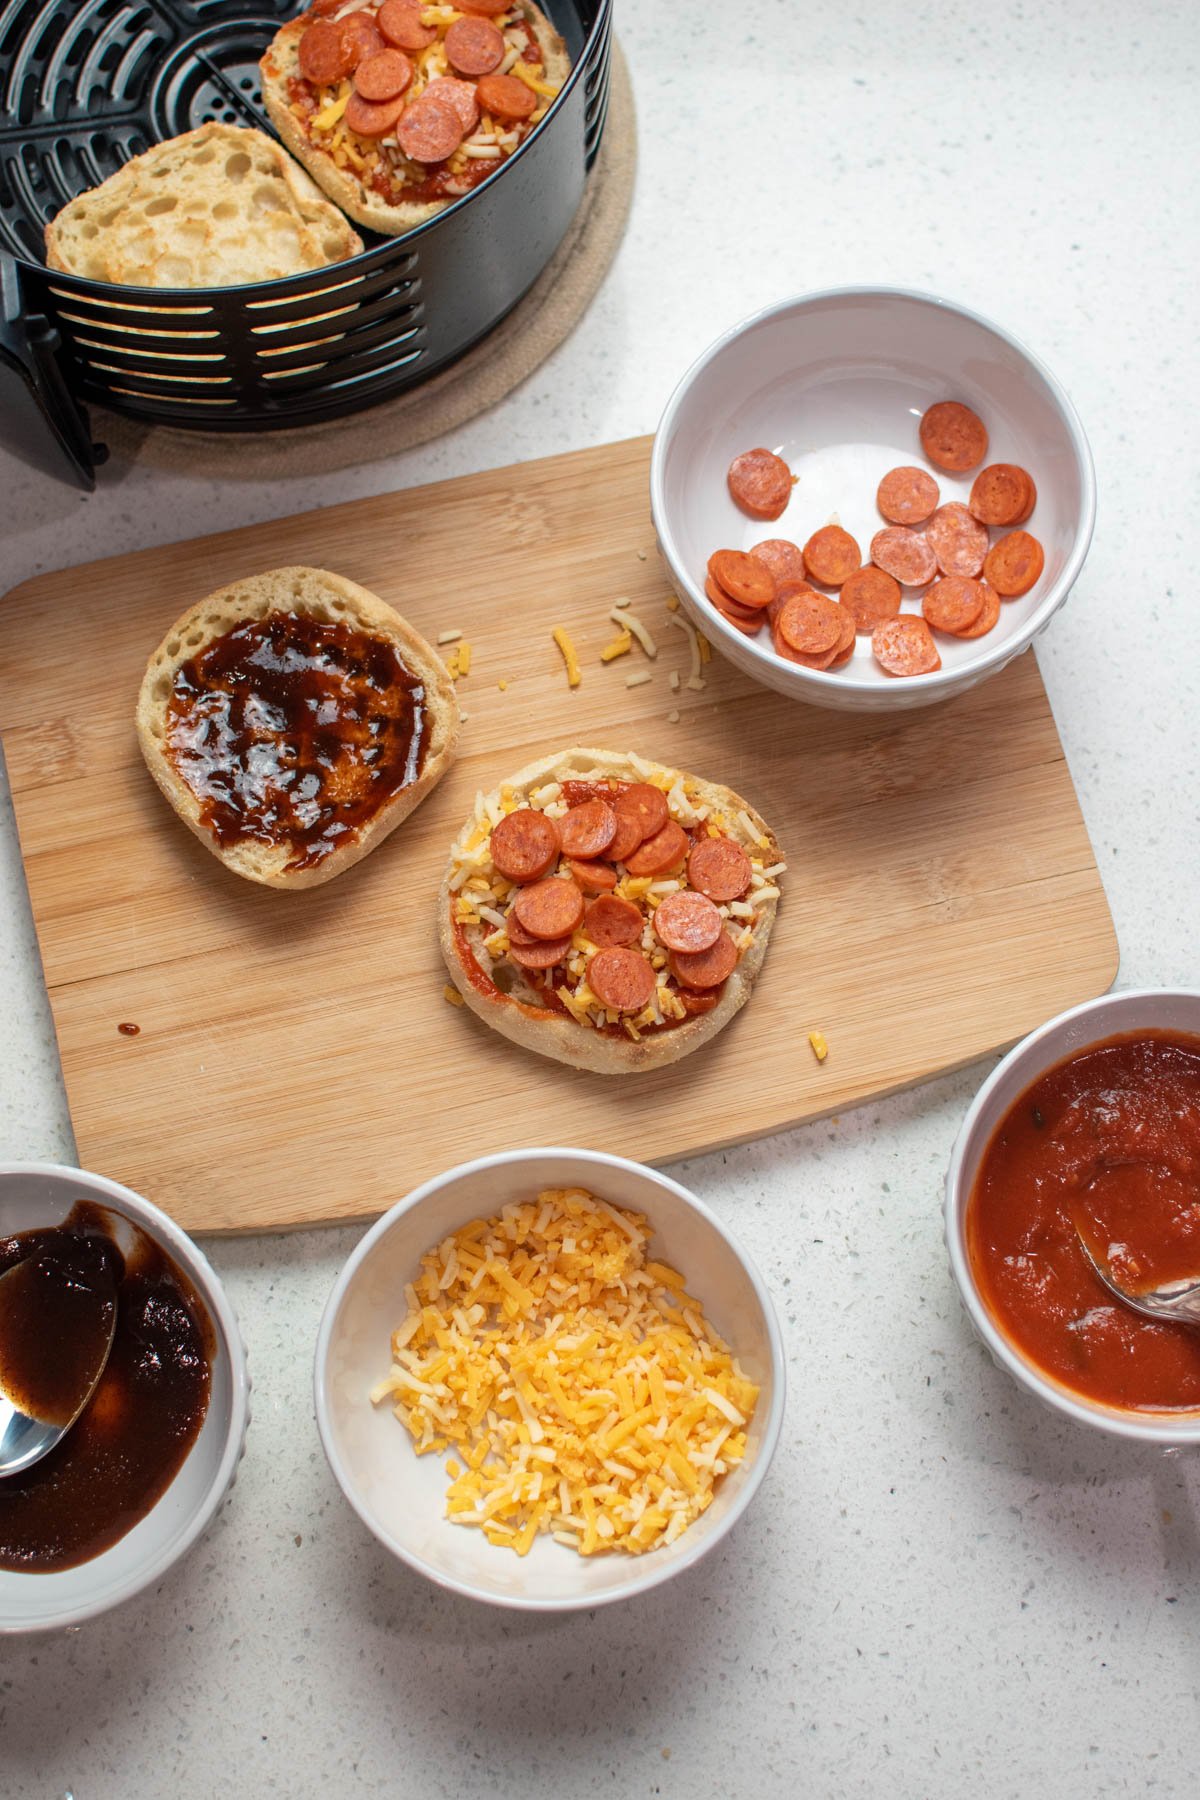 Bowls of pizza toppings on counter next to cutting board with mini pizzas on it.